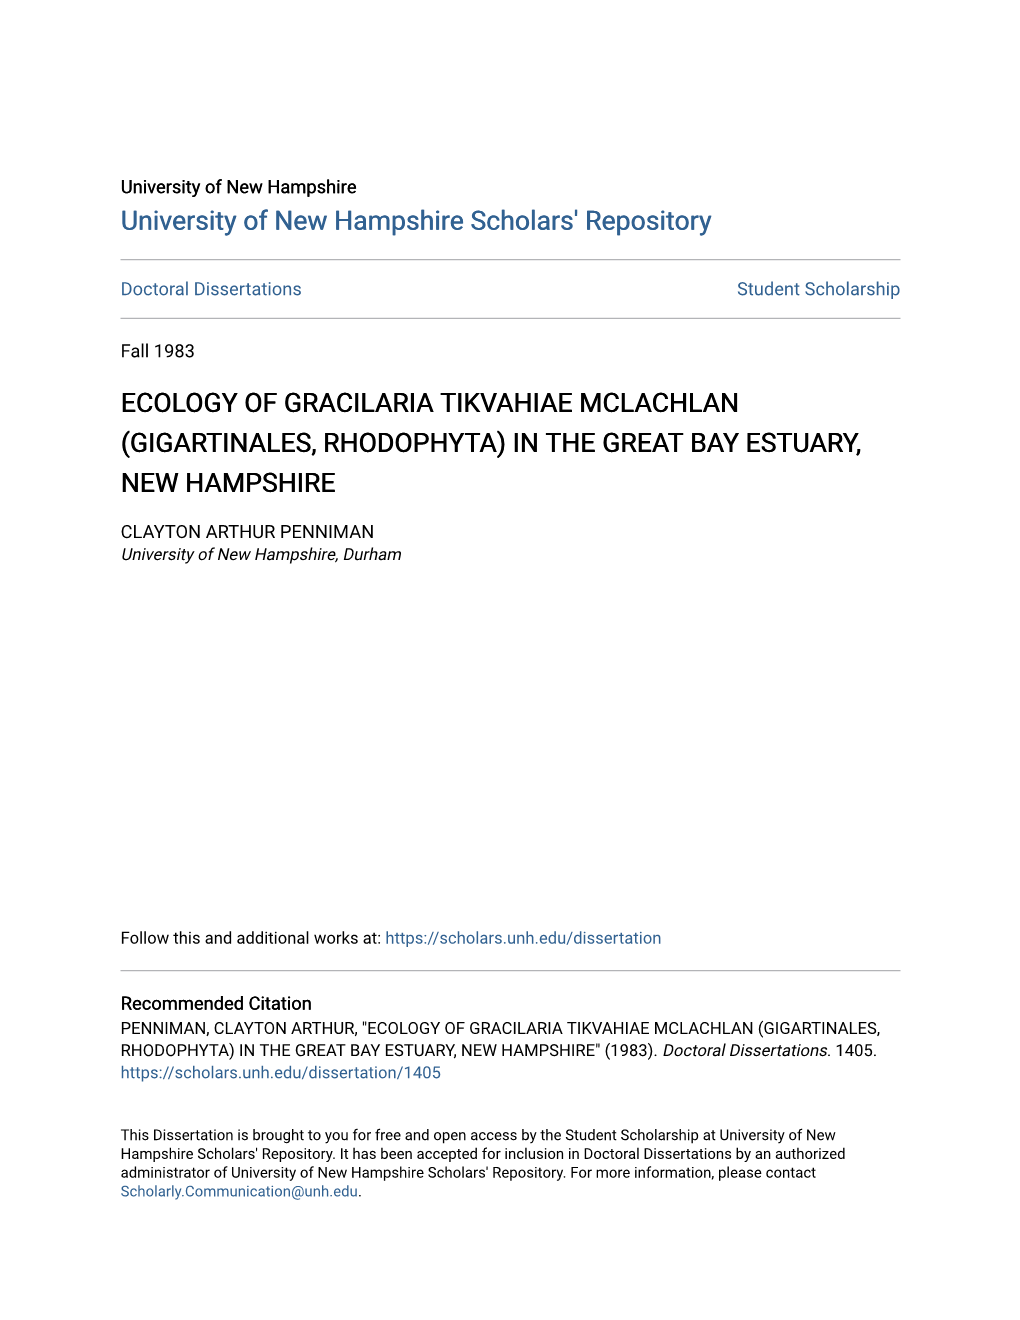 Ecology of Gracilaria Tikvahiae Mclachlan (Gigartinales, Rhodophyta) in the Great Bay Estuary, New Hampshire